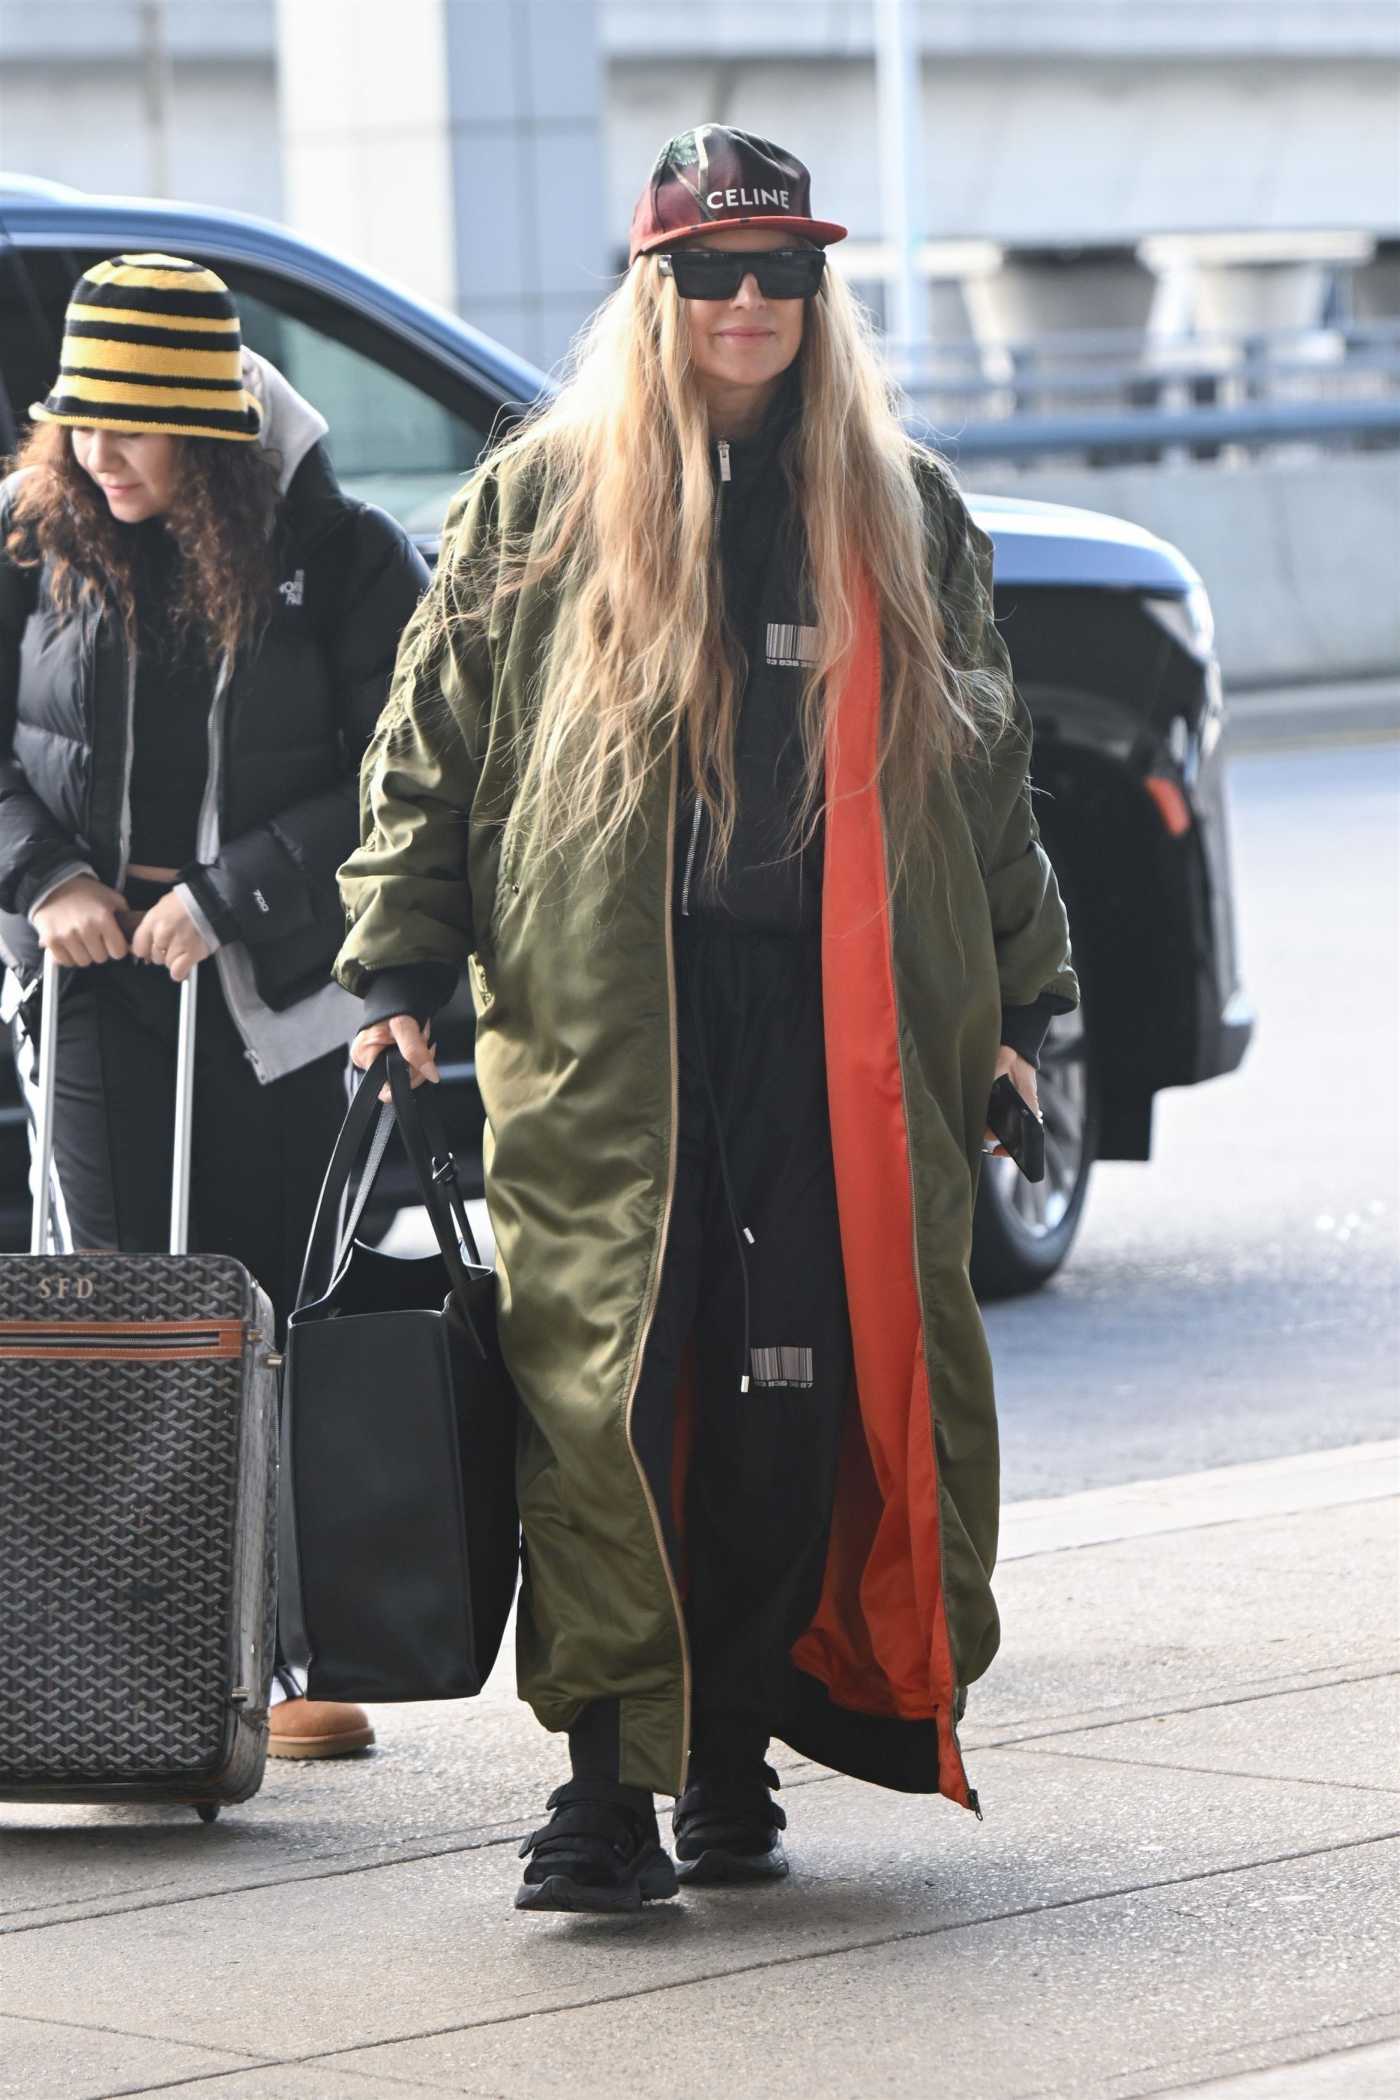 Fergie in an Olive Coat Arrives at JFK Airport in New York 12/01/2022